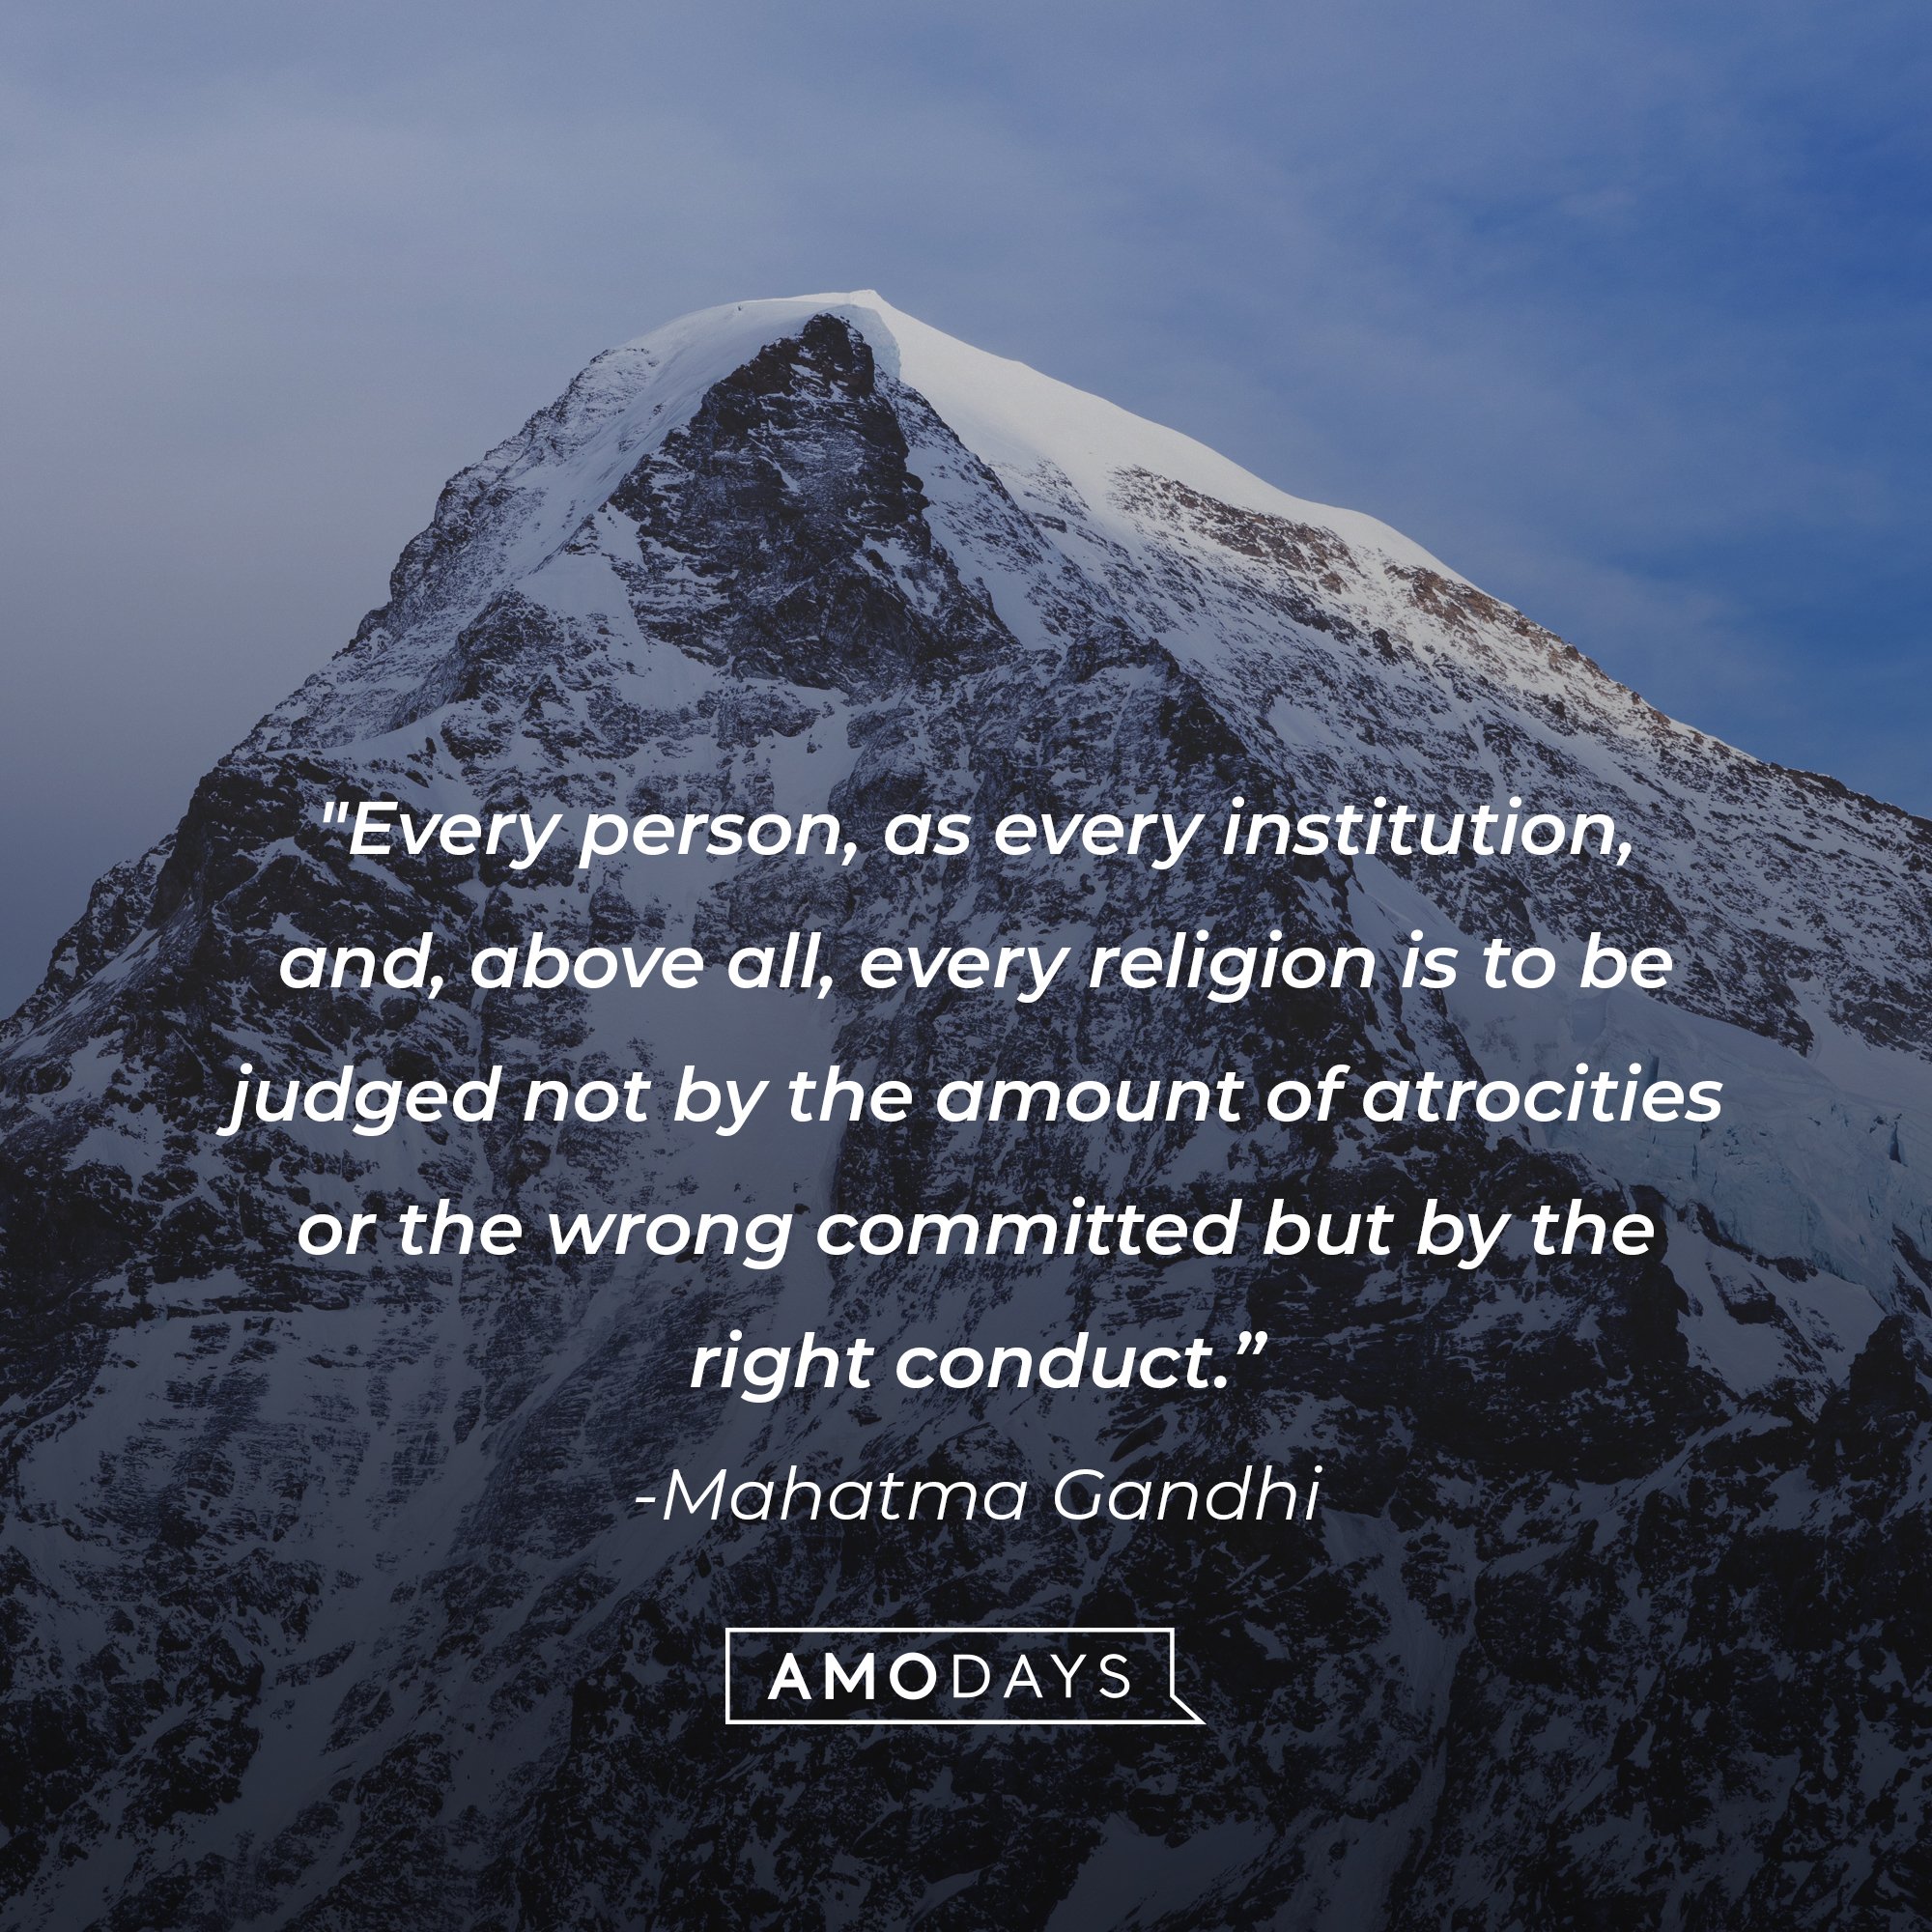 Mahatma Gandhi’s quote: "Every person, as every institution, and, above all, every religion is to be judged not by the amount of atrocities or the wrong committed but by the right conduct." | Image: AmoDays